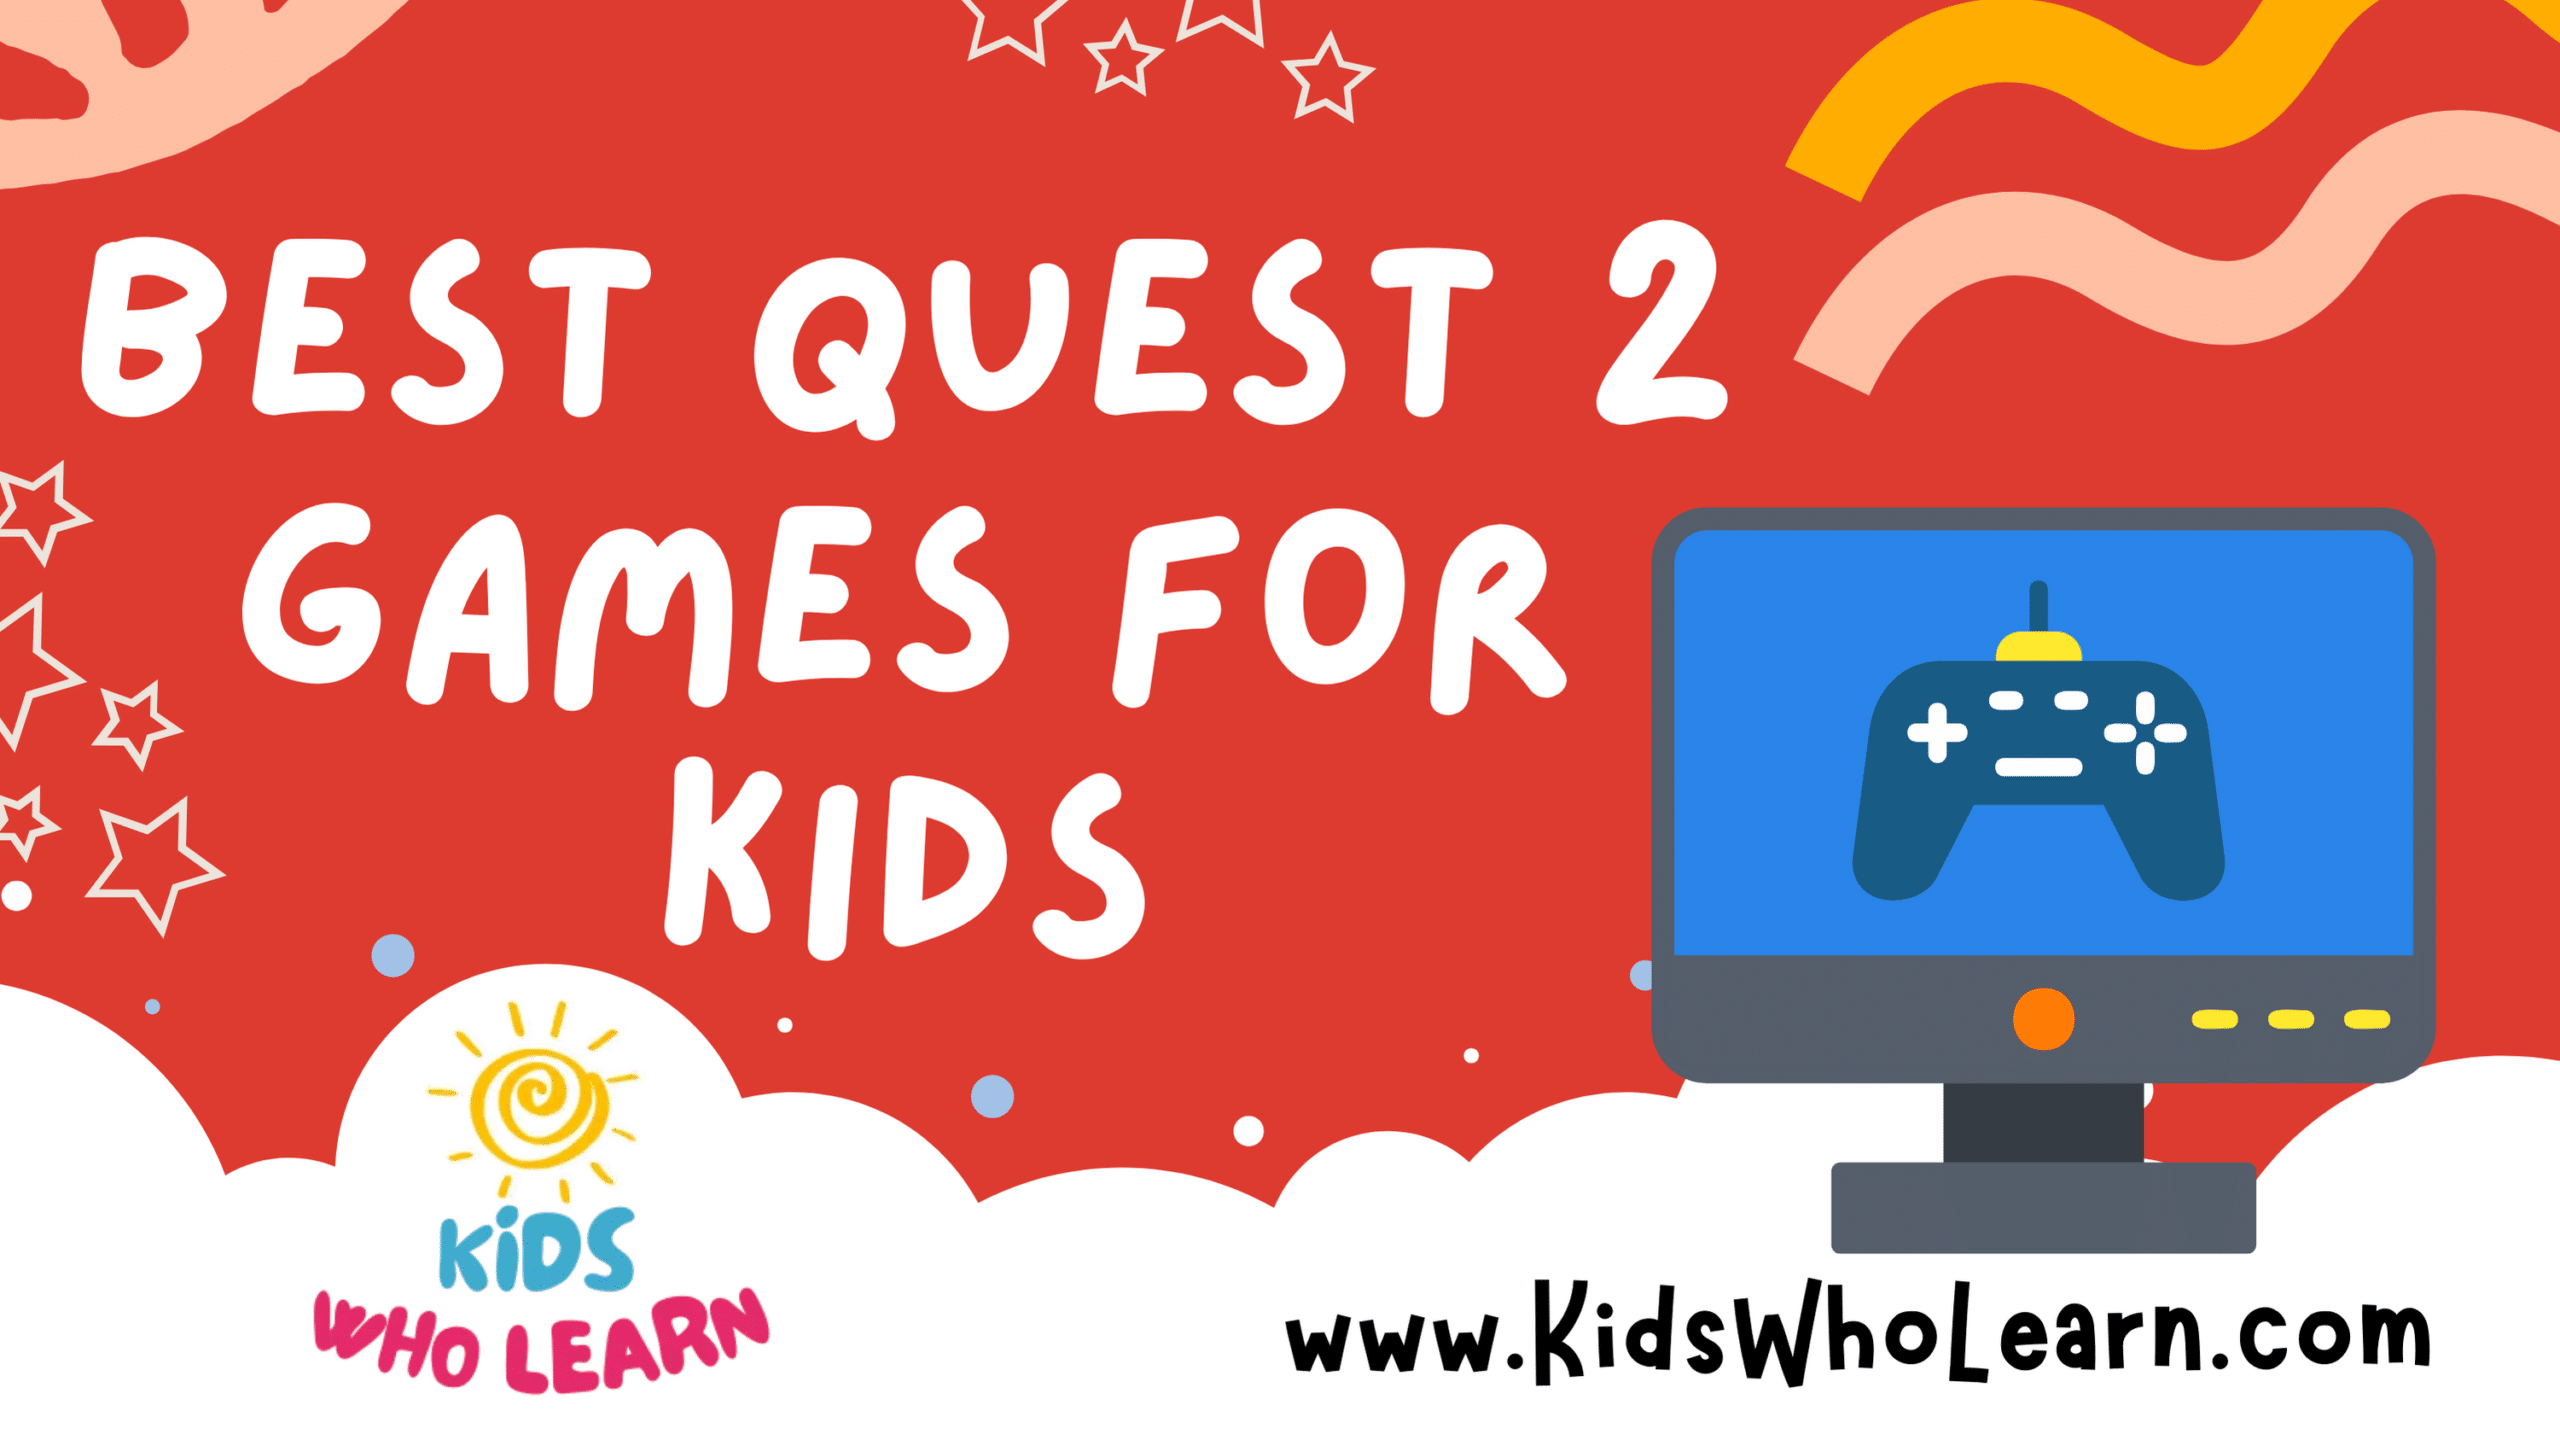 Best Quest 2 Games For Kids